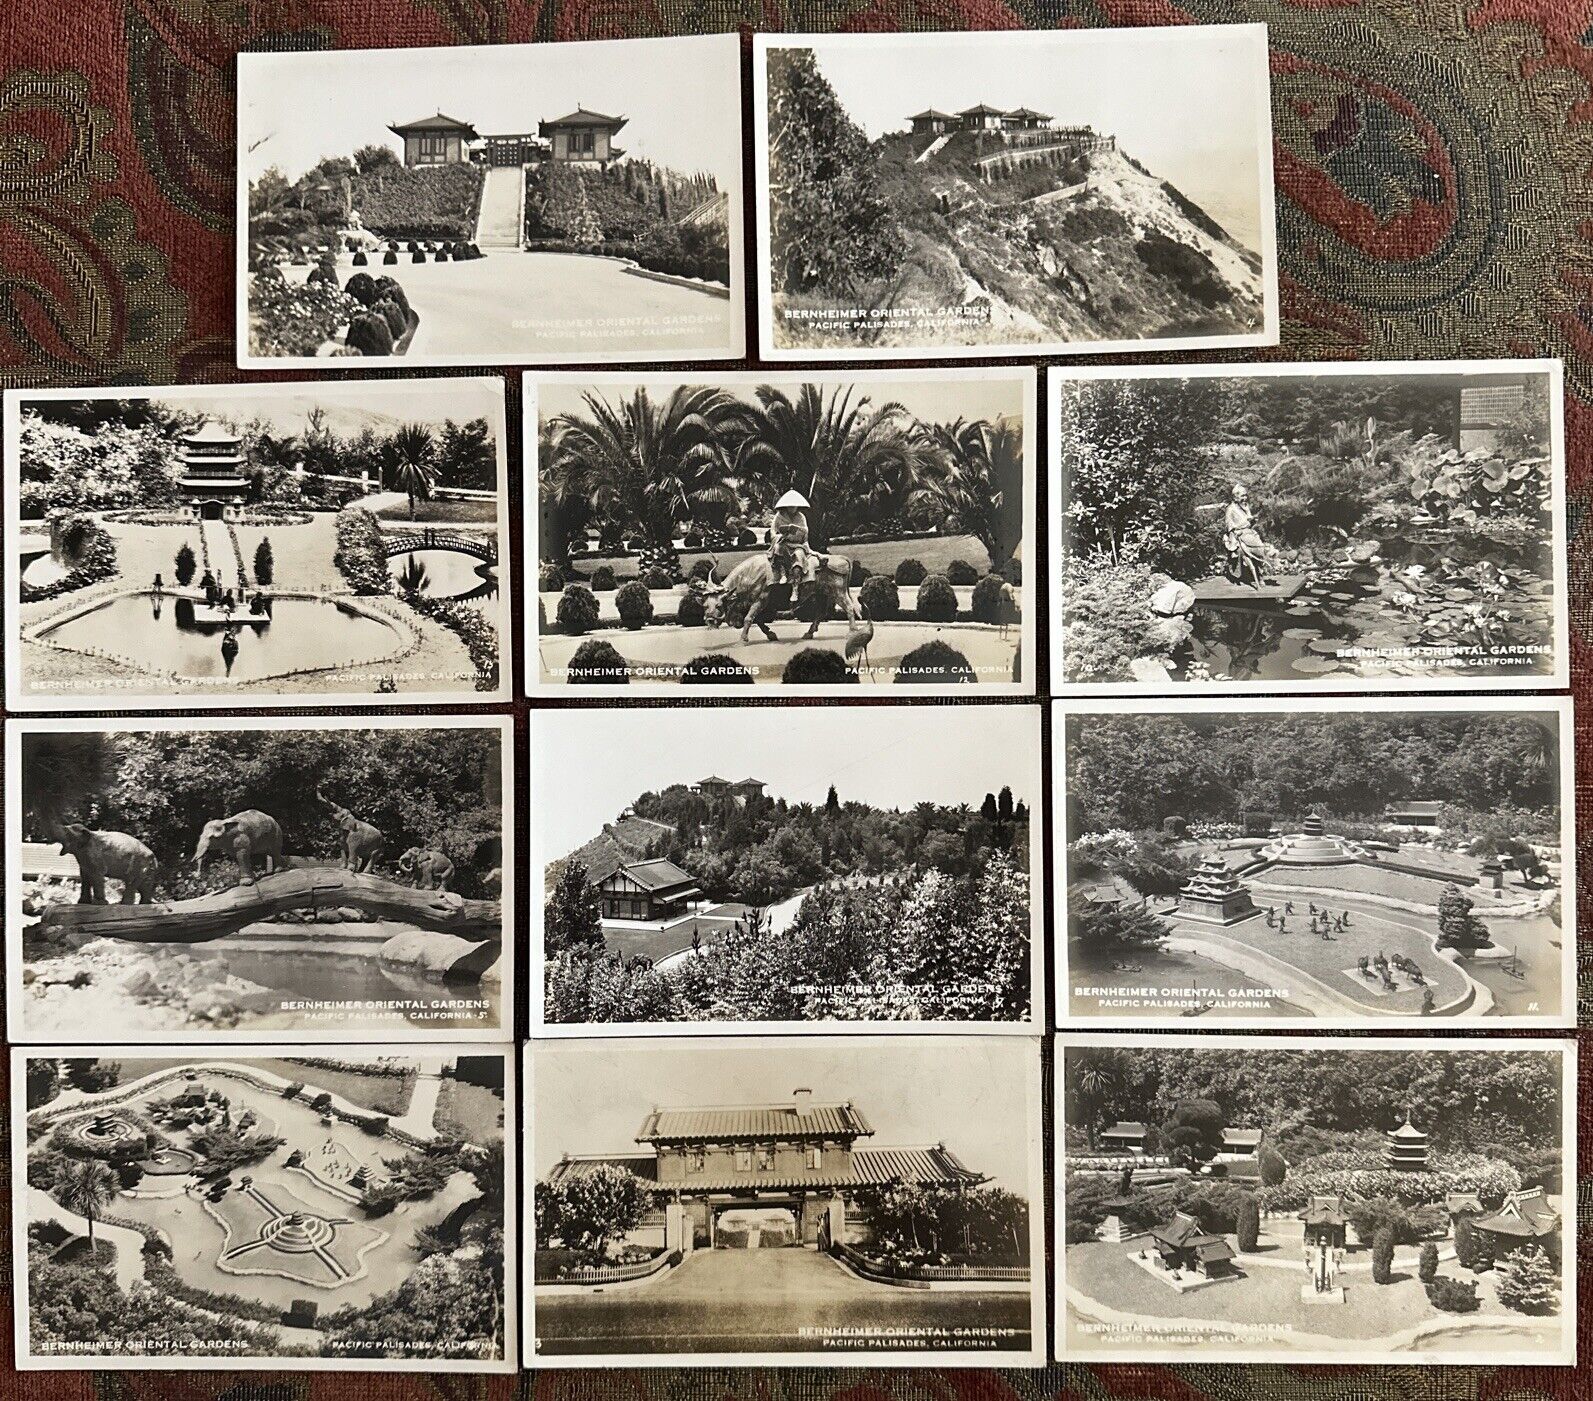 Vintage Early 1940s Bernheimer Oriental Gardens Postcards in Pacific Palisades